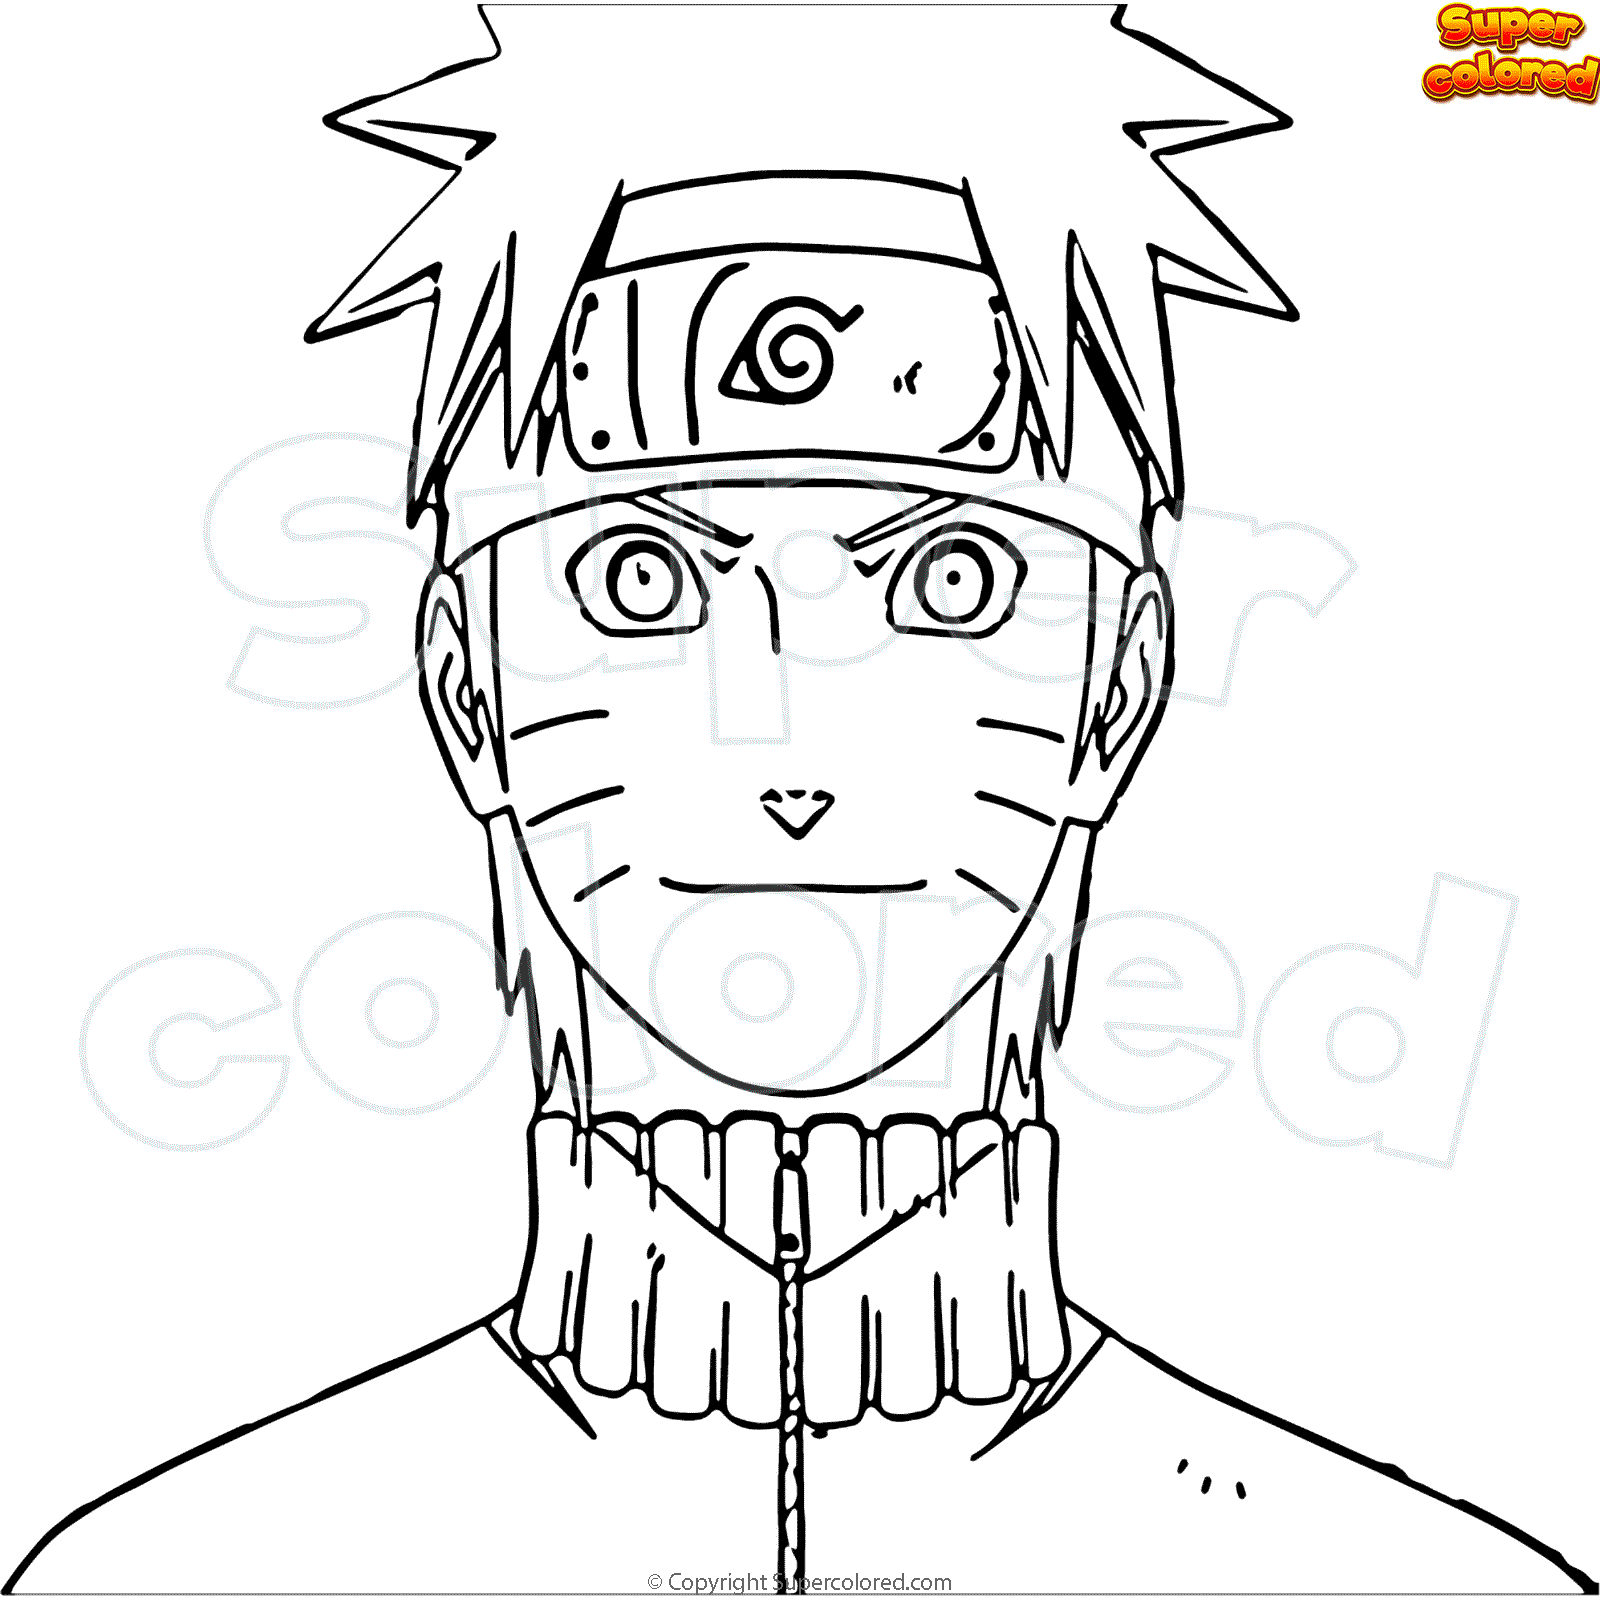 Have Fun With These Naruto Coloring Pages PDF Ideas - Coloringfolder.com |  Naruto sketch drawing, Coloring pages to print, Naruto drawings